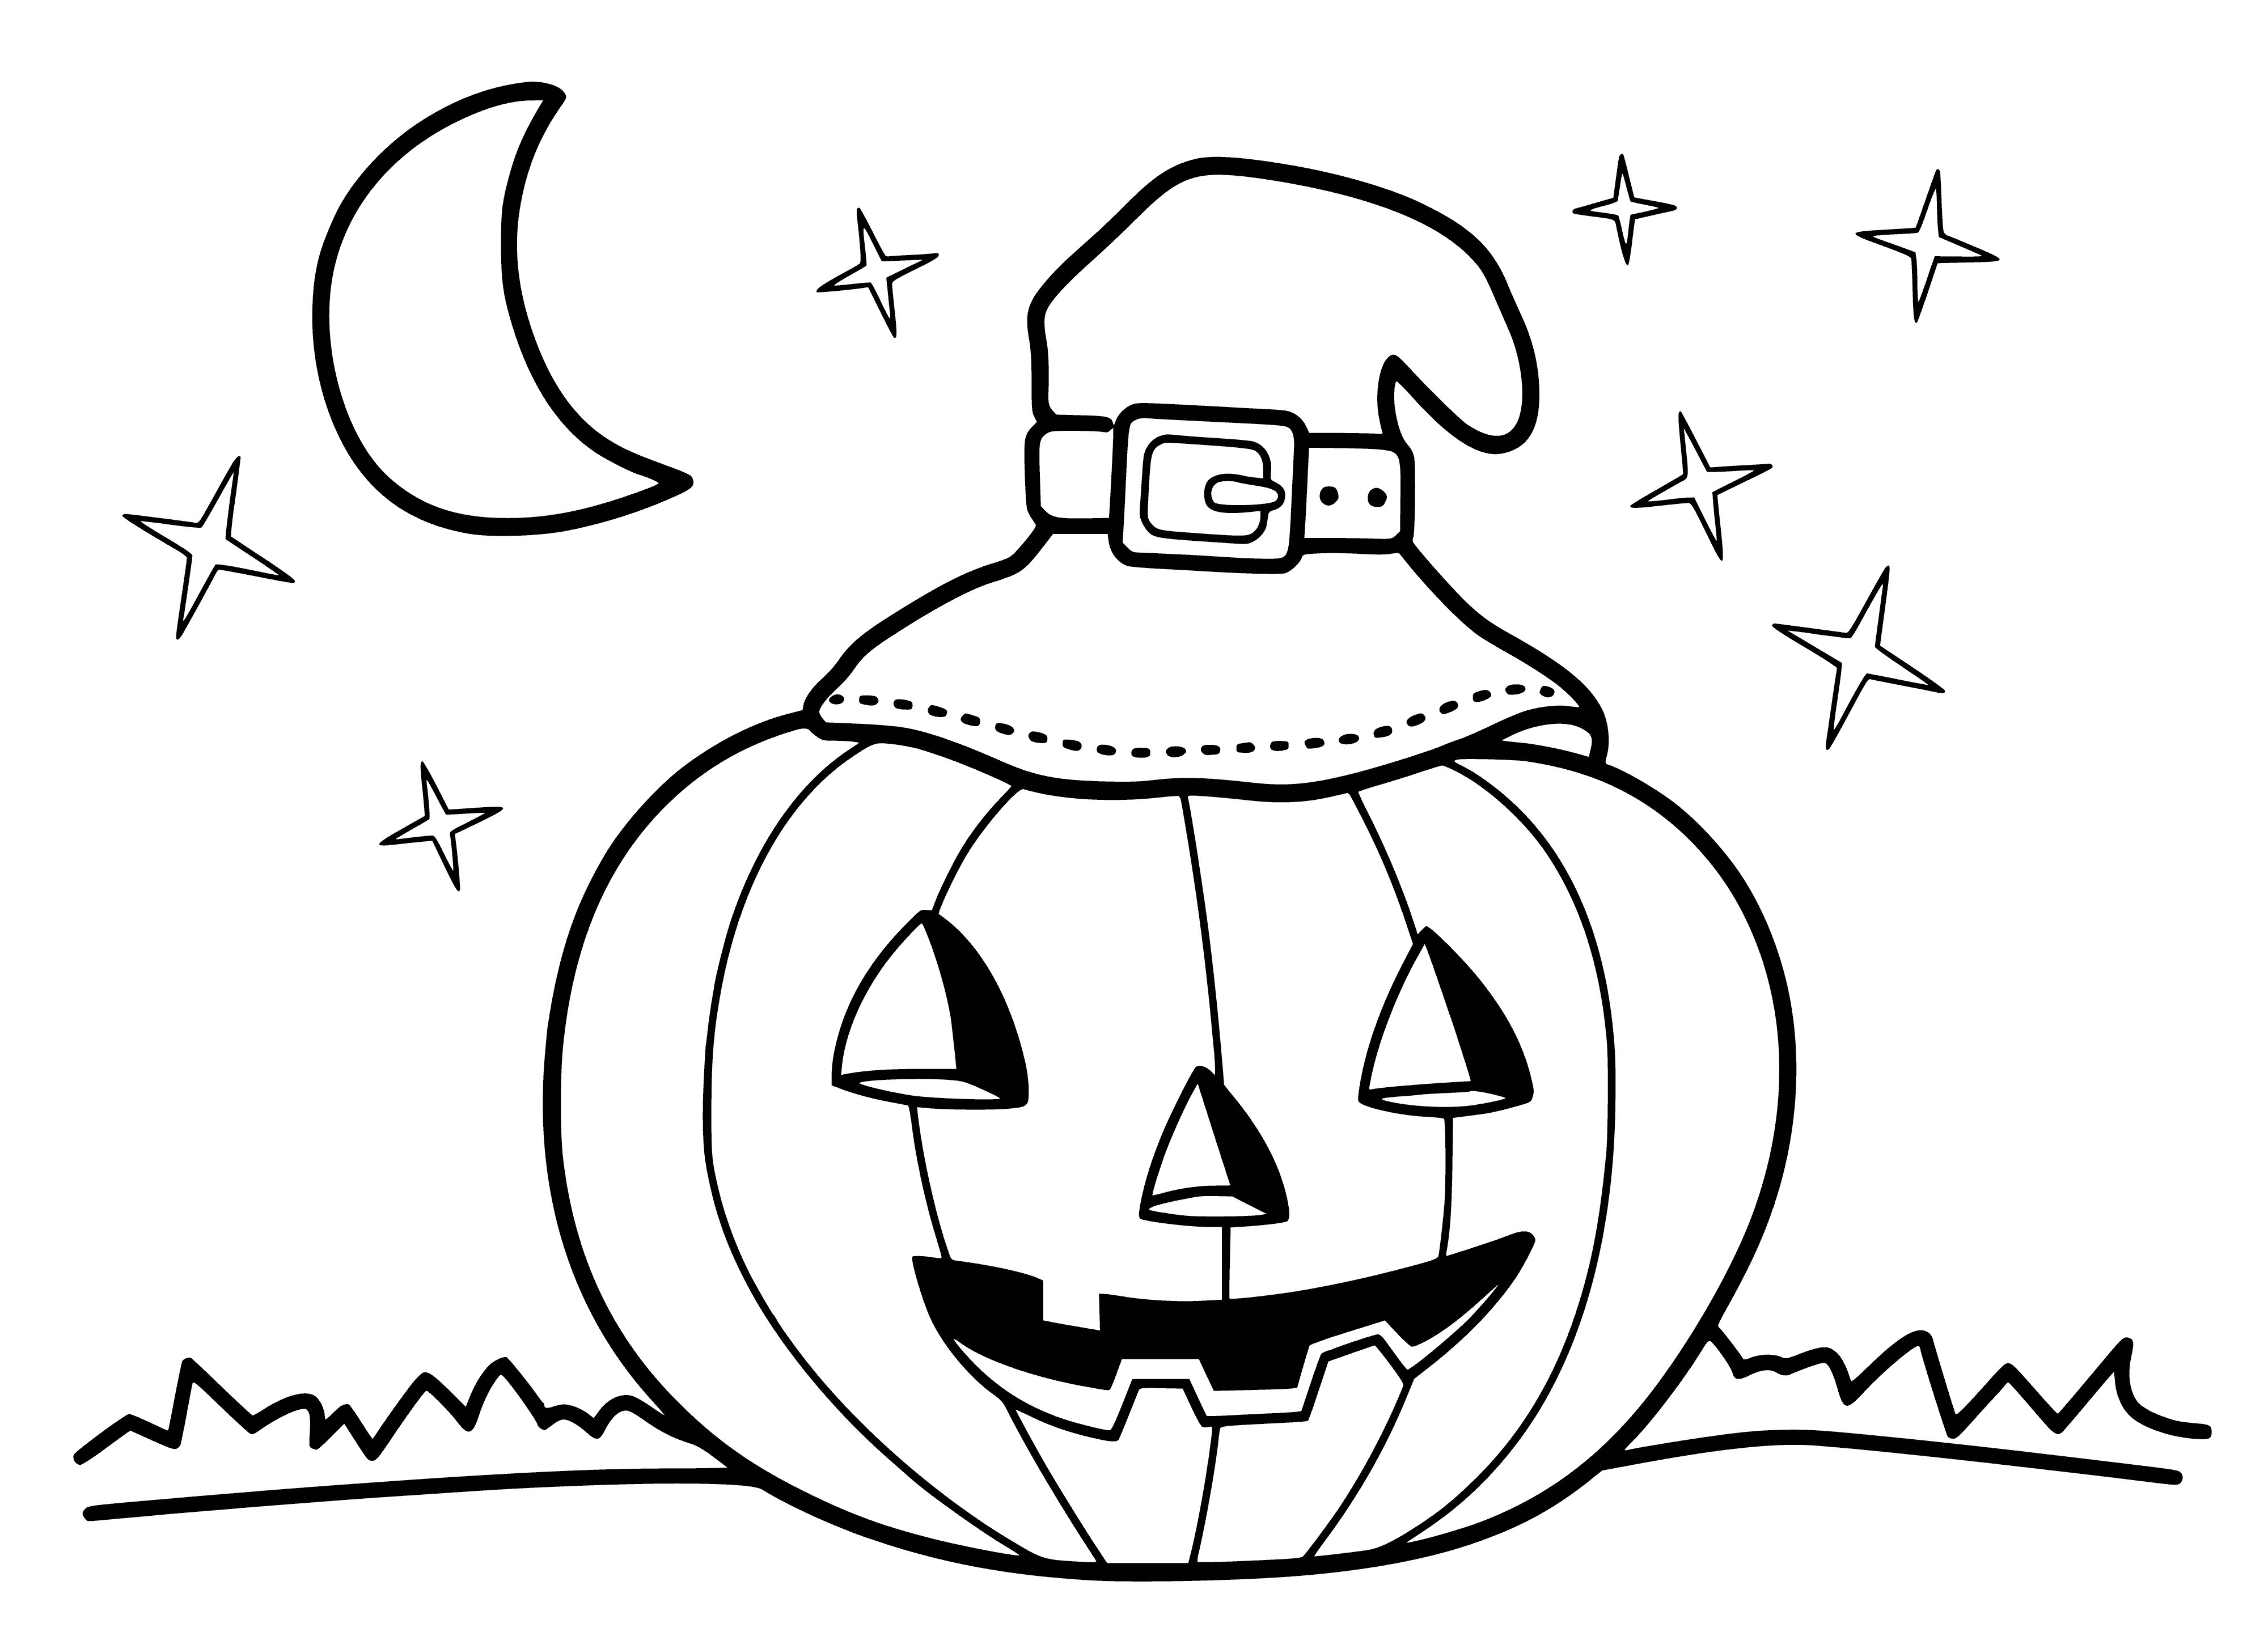 coloring page: Carve a face into a Halloween pumpkin and put a candle inside - it lights up from the inside, creating a spooky effect!